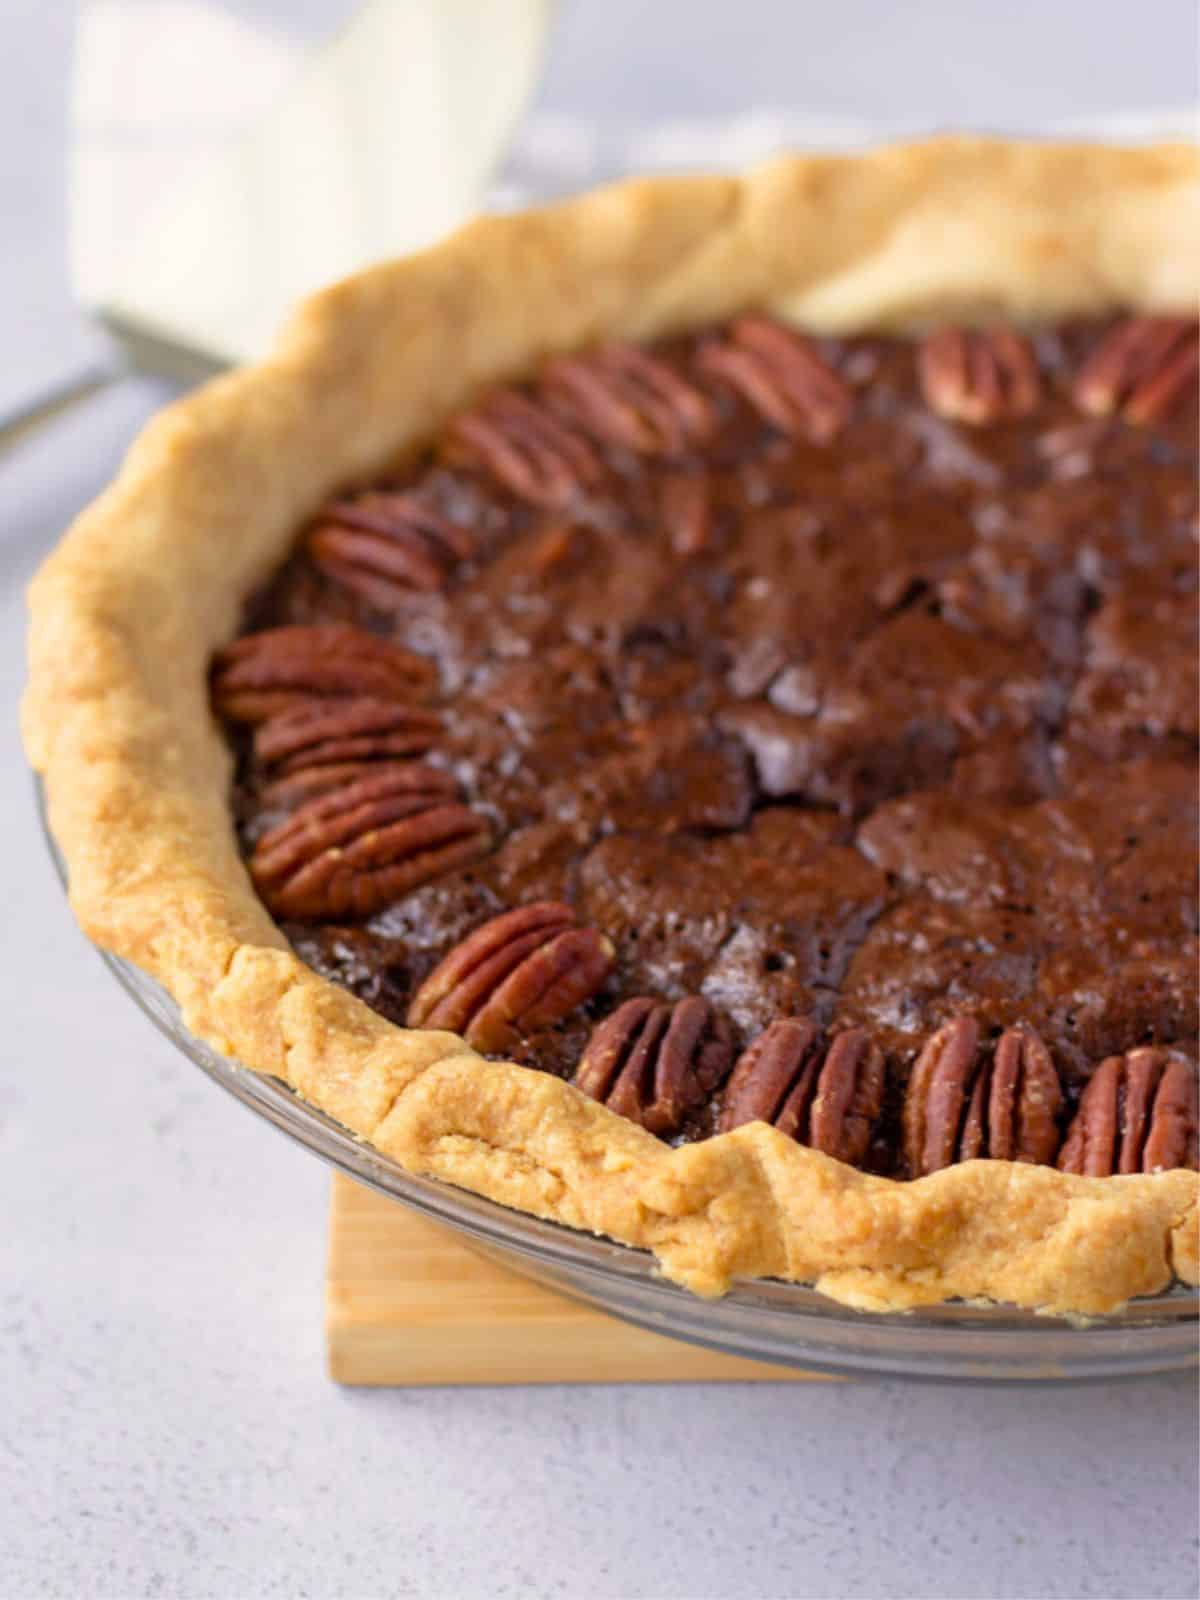 A whole baked chocolate pecan pie.